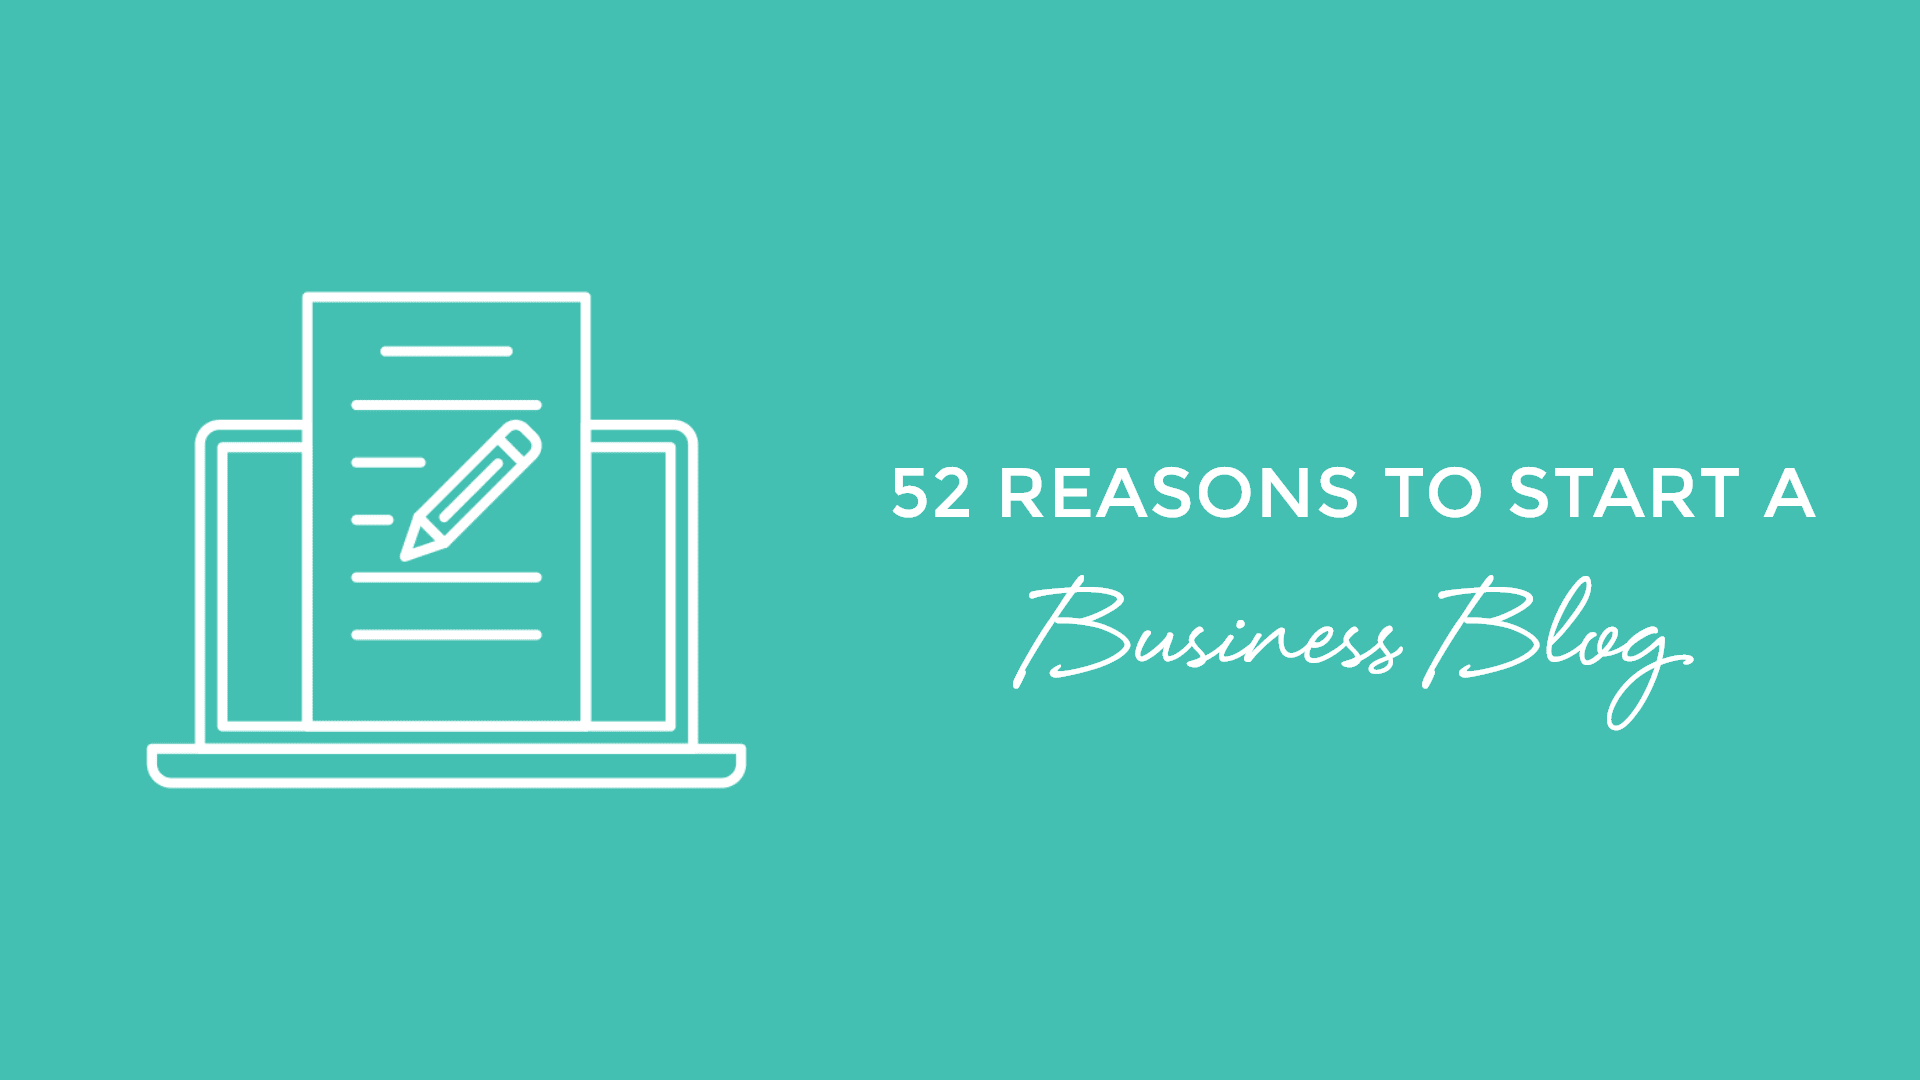 52 Reasons to start a Business Blog